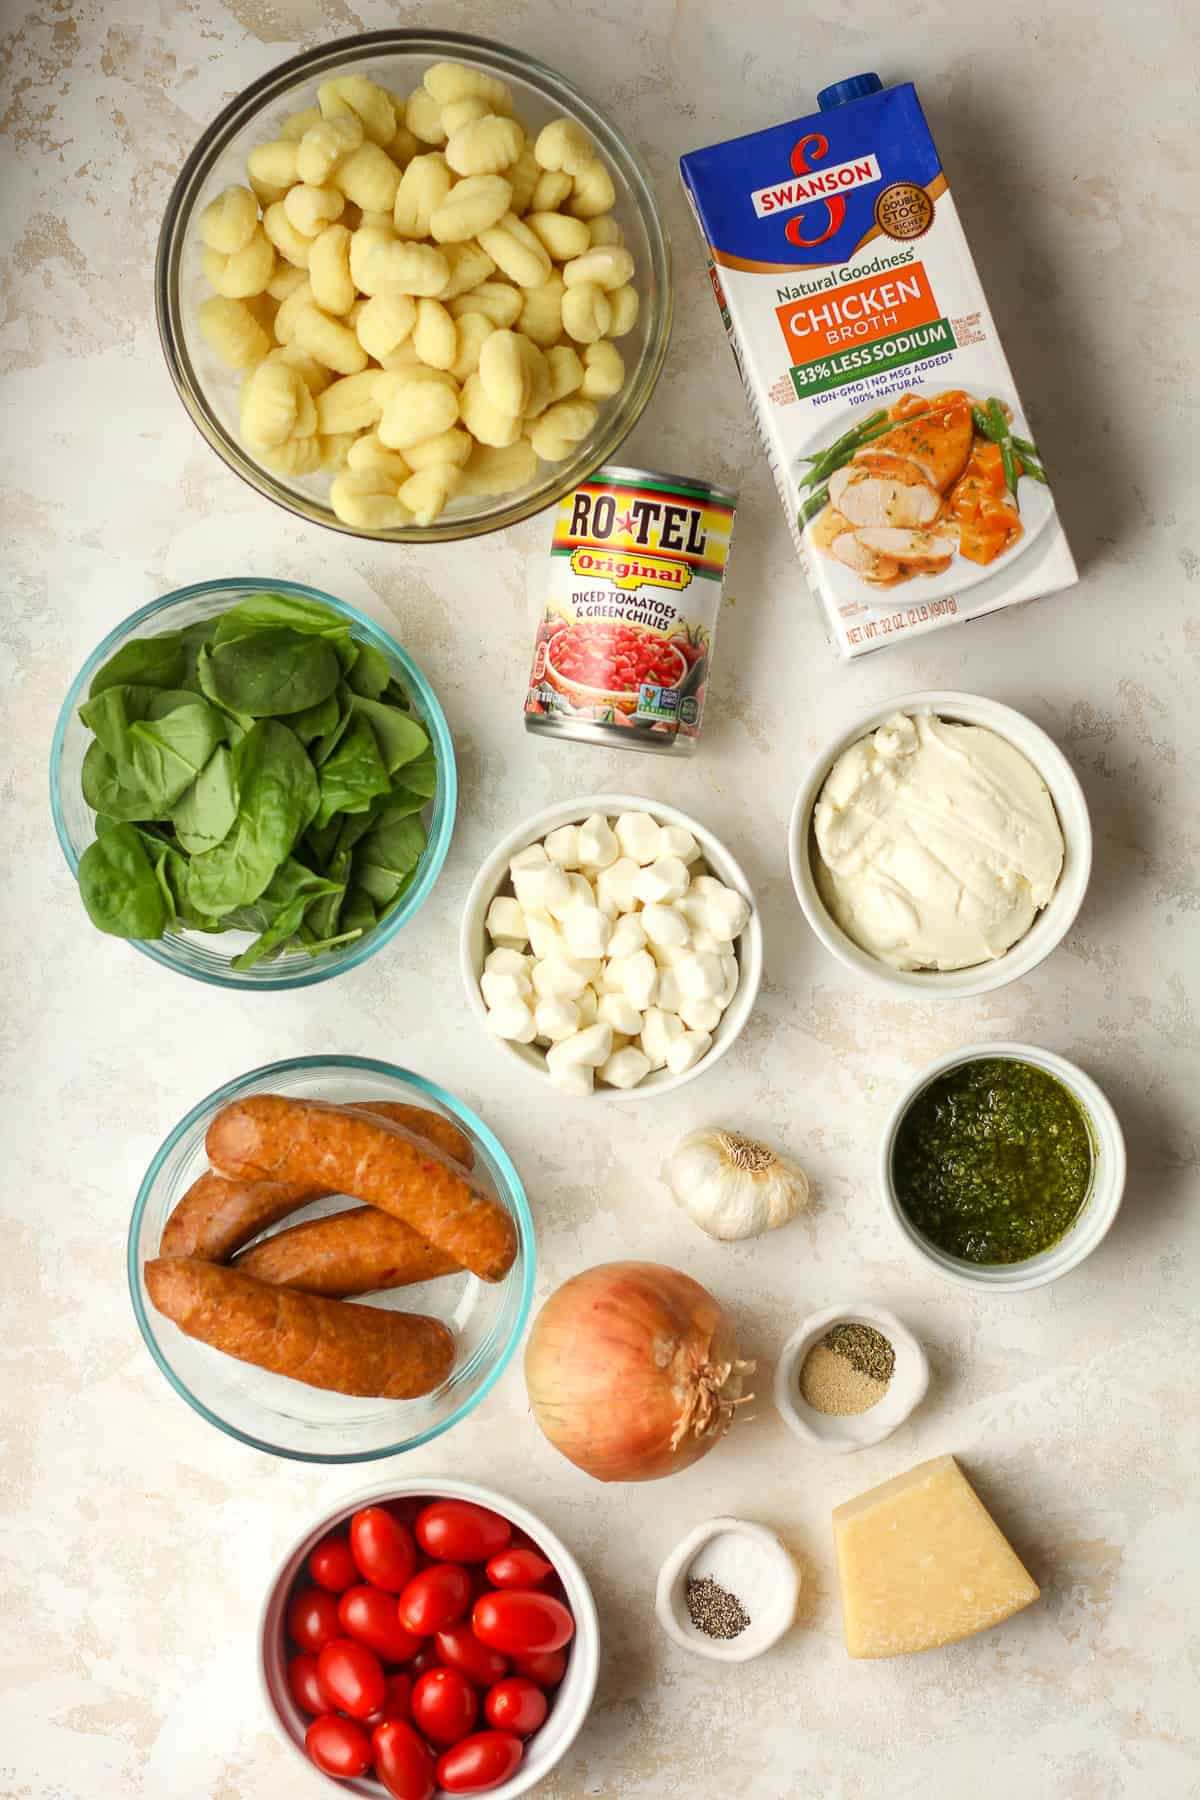 The ingredients for the sausage and gnocchi skillet recipe.